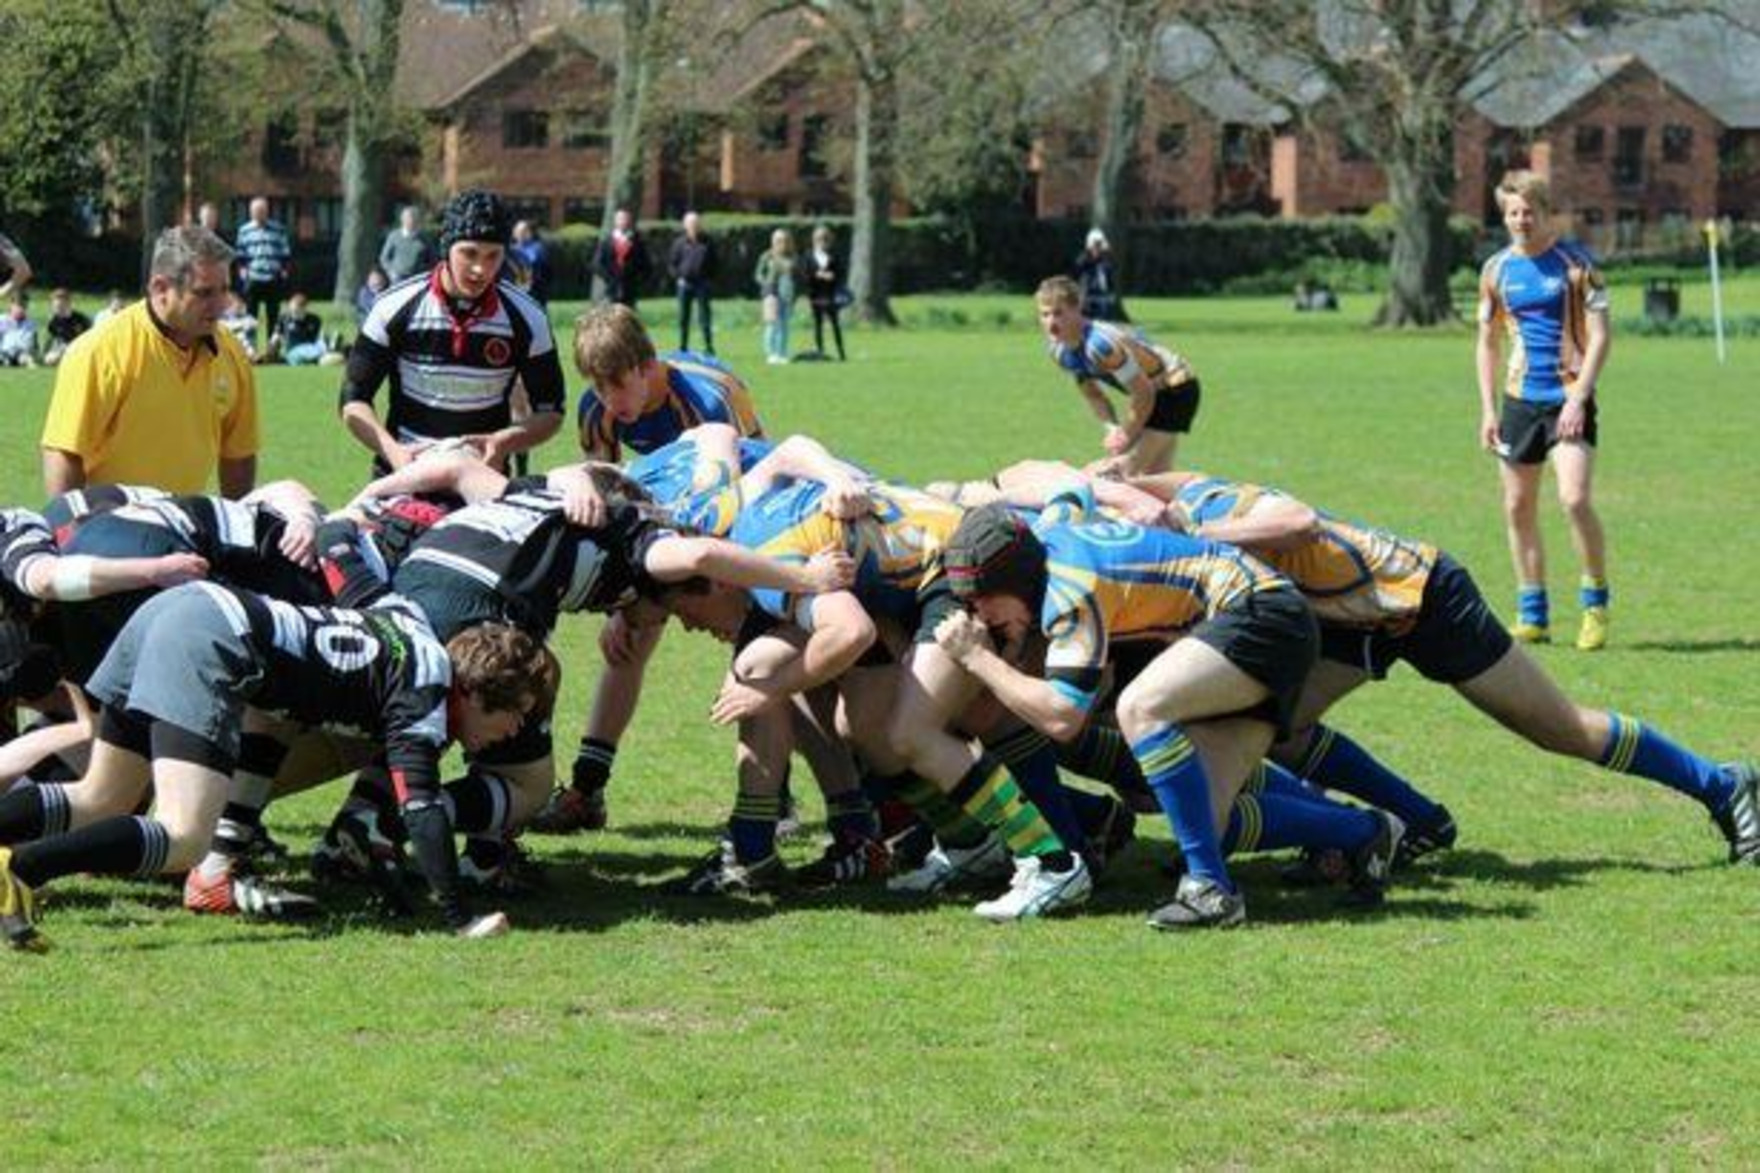 London Freemasons generous donation saves the life of rugby player